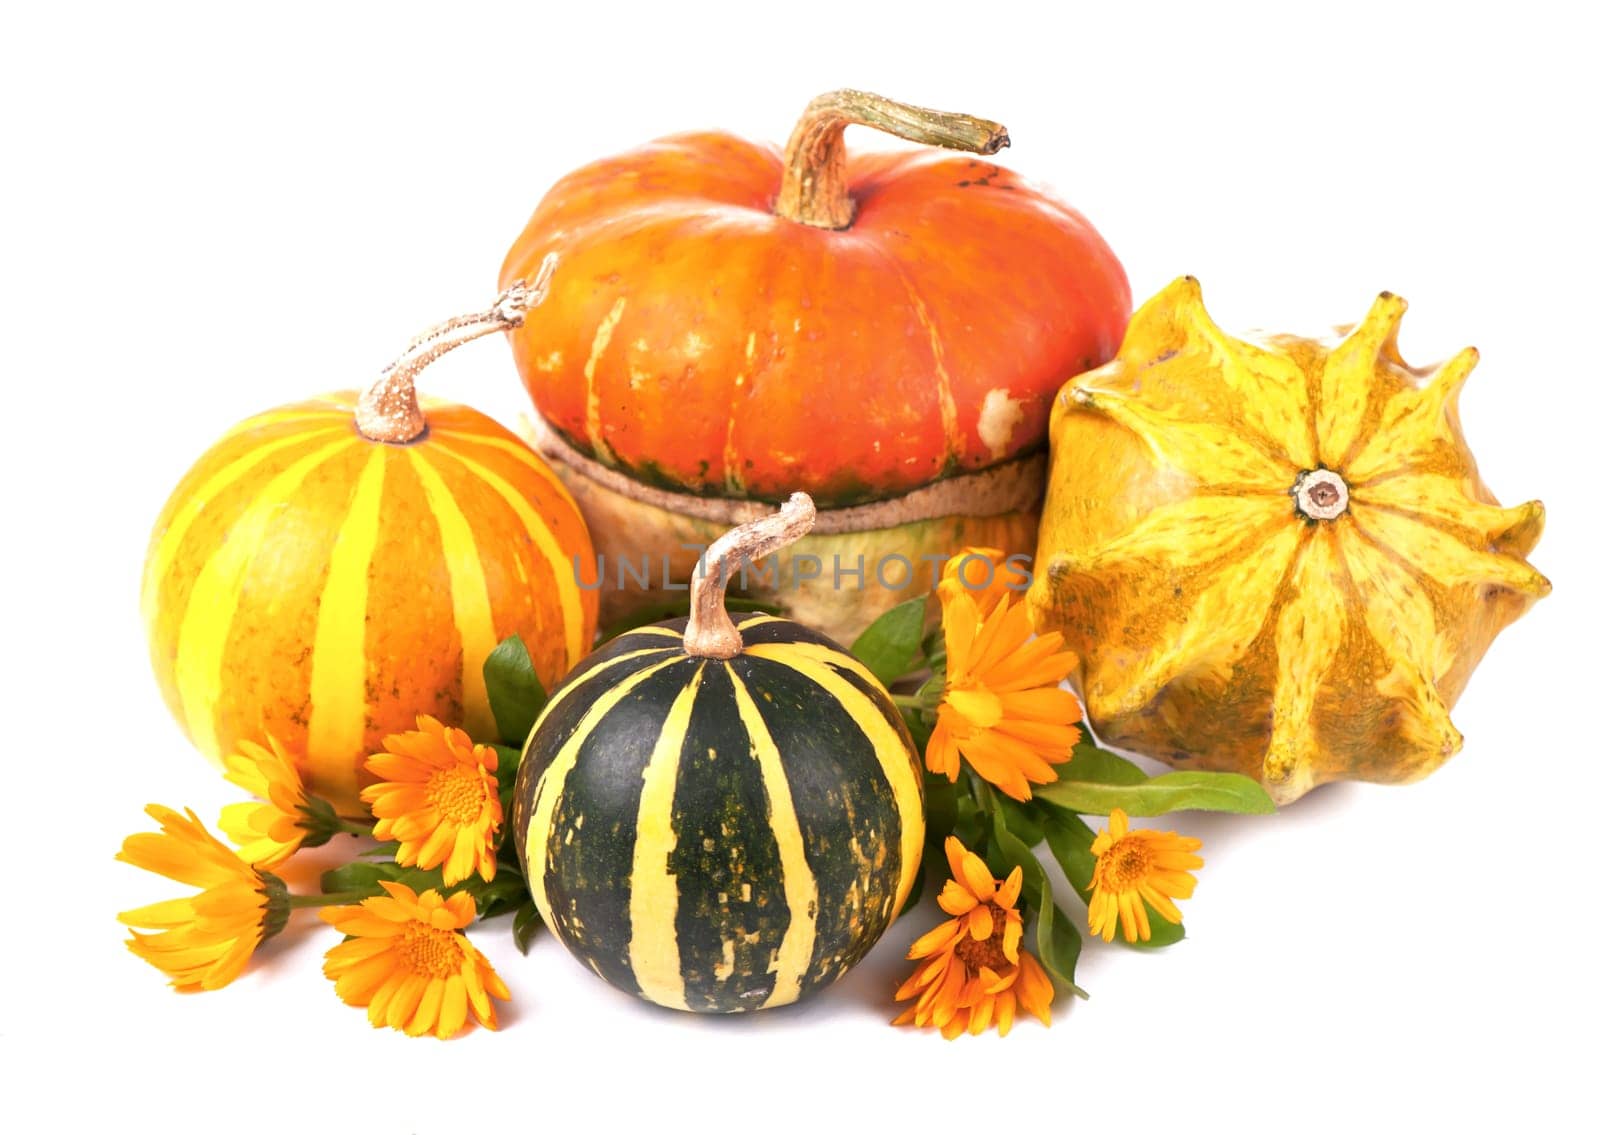 several of striped green and orange pumpkins isolated on white background by aprilphoto